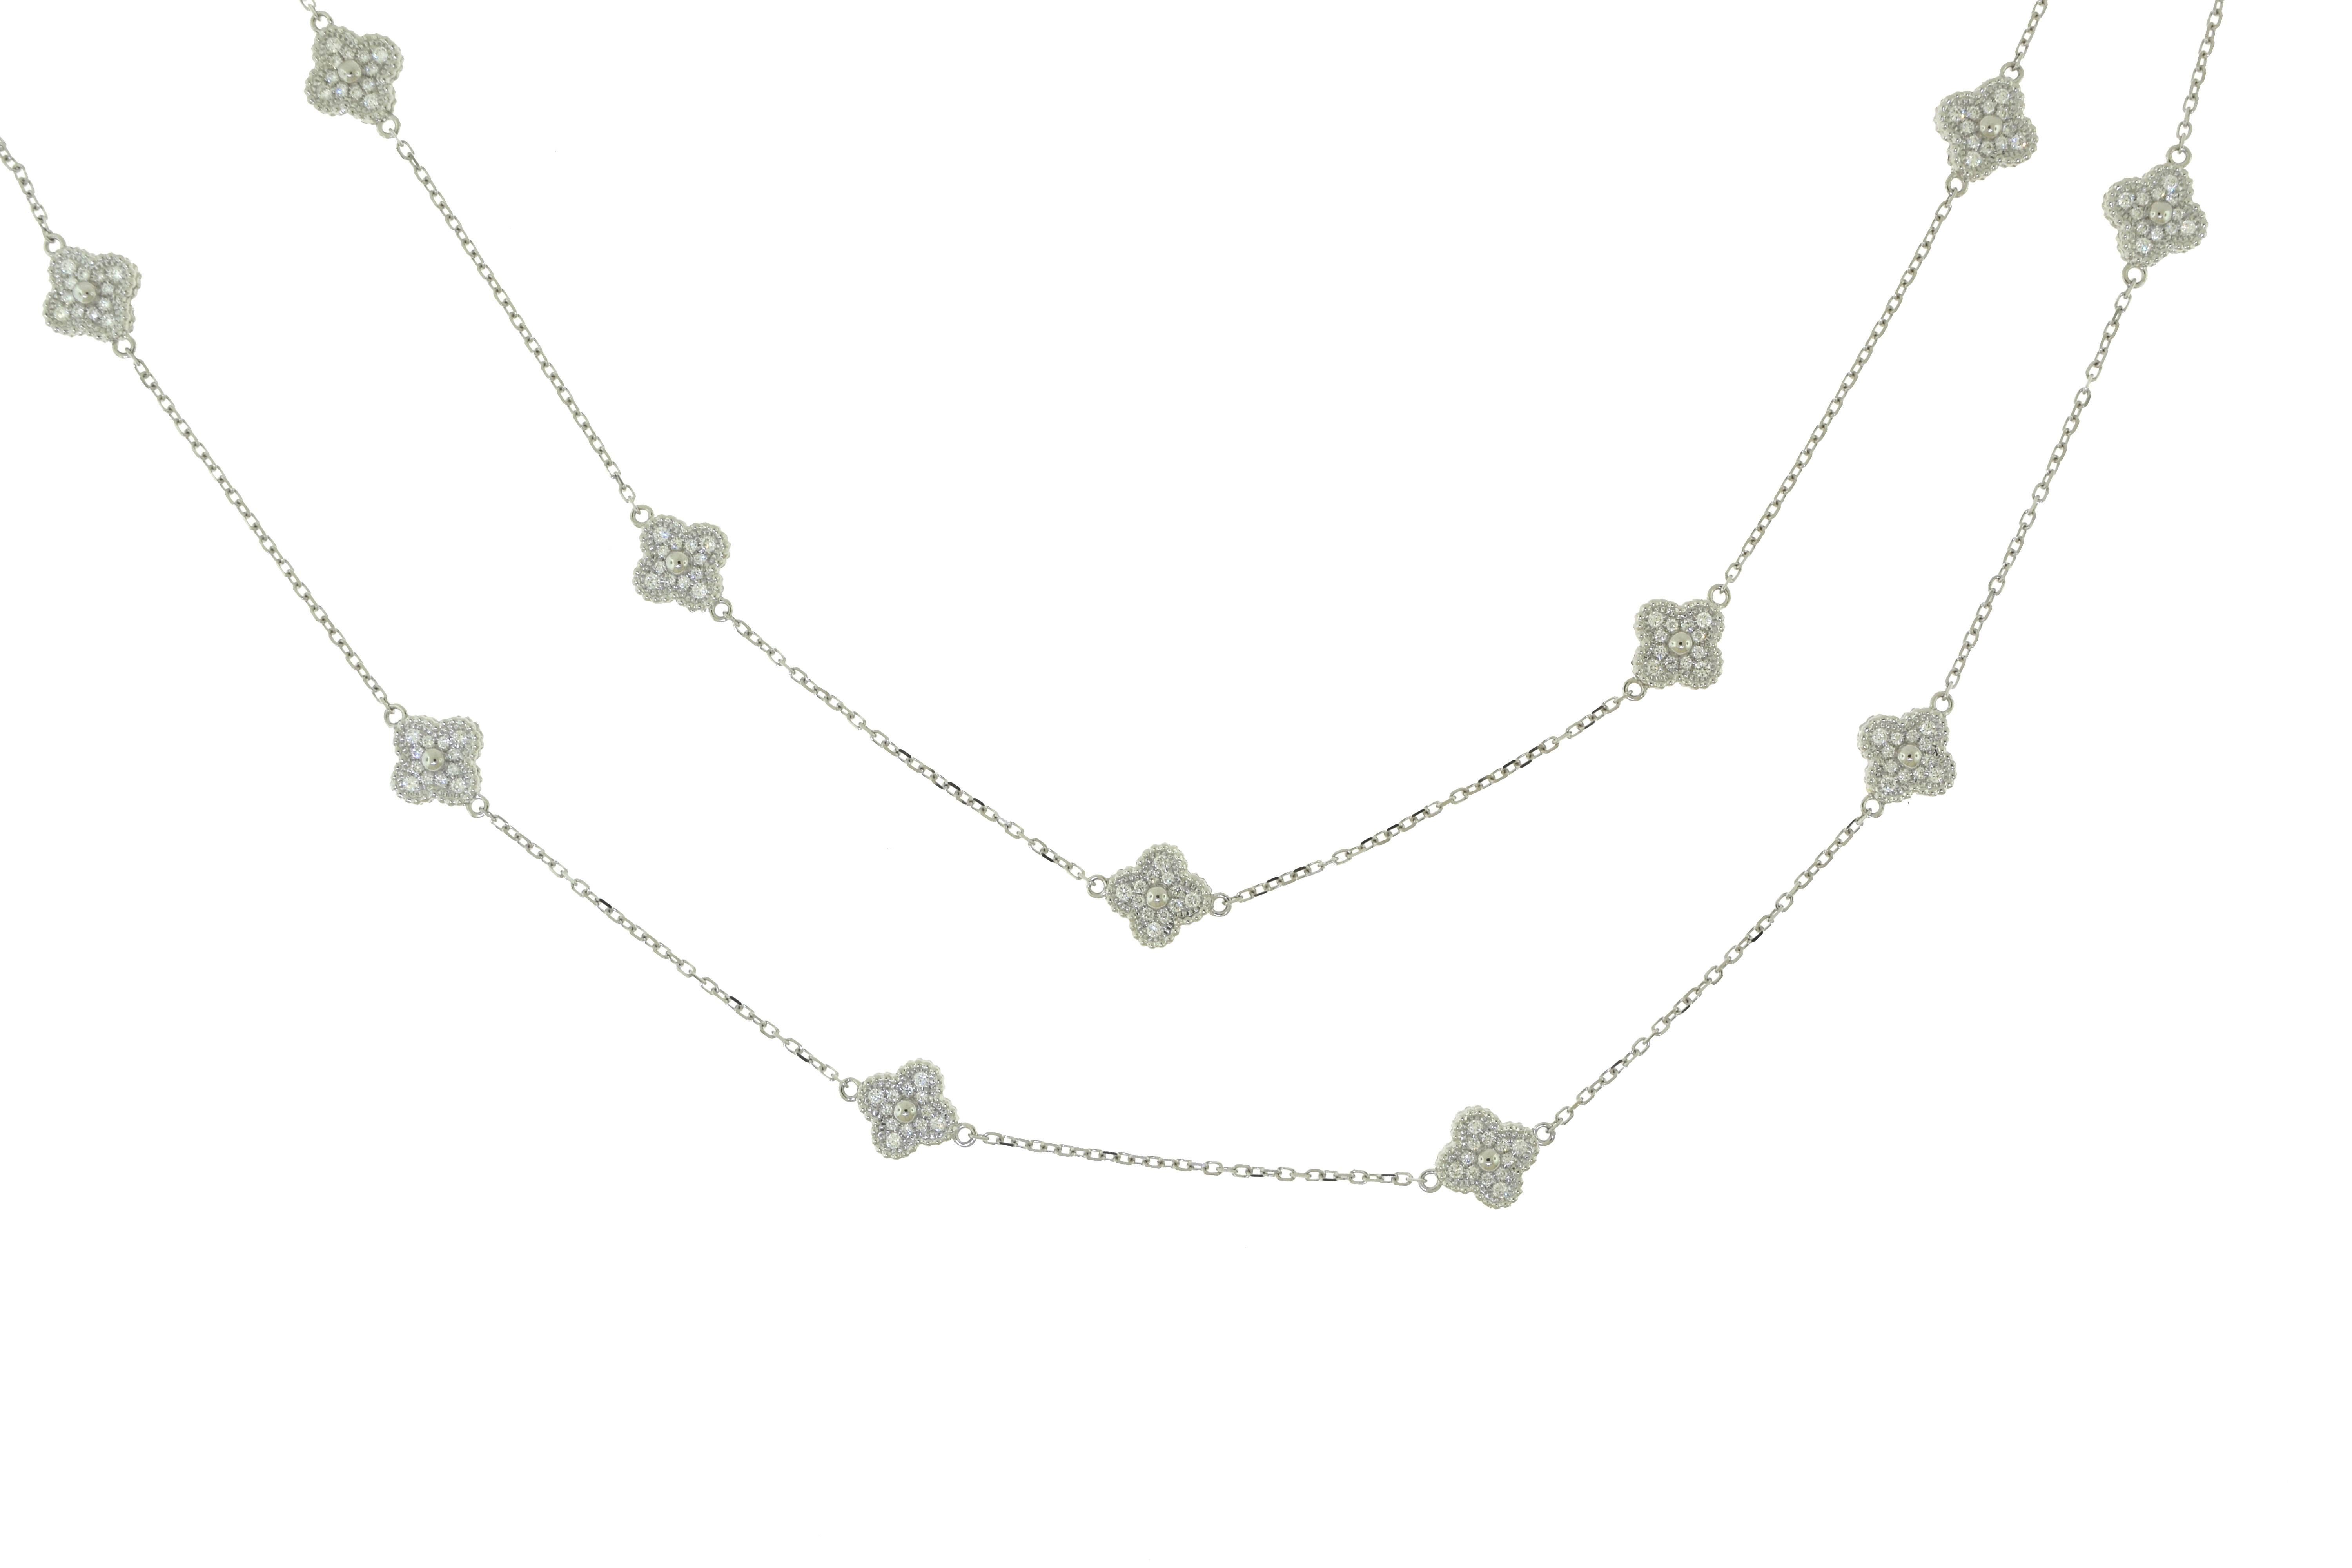 An absolutely magnificent very long necklace with 16 four leaf clover motif's.

Metal: 18 Karat White Gold
Stones: 192 Round Brilliant Cut Diamonds
Diamond Color: F
Diamond Clarity: VS
Total Carat Weight: 2.15 ct
Necklace Length: 32 inches
Total